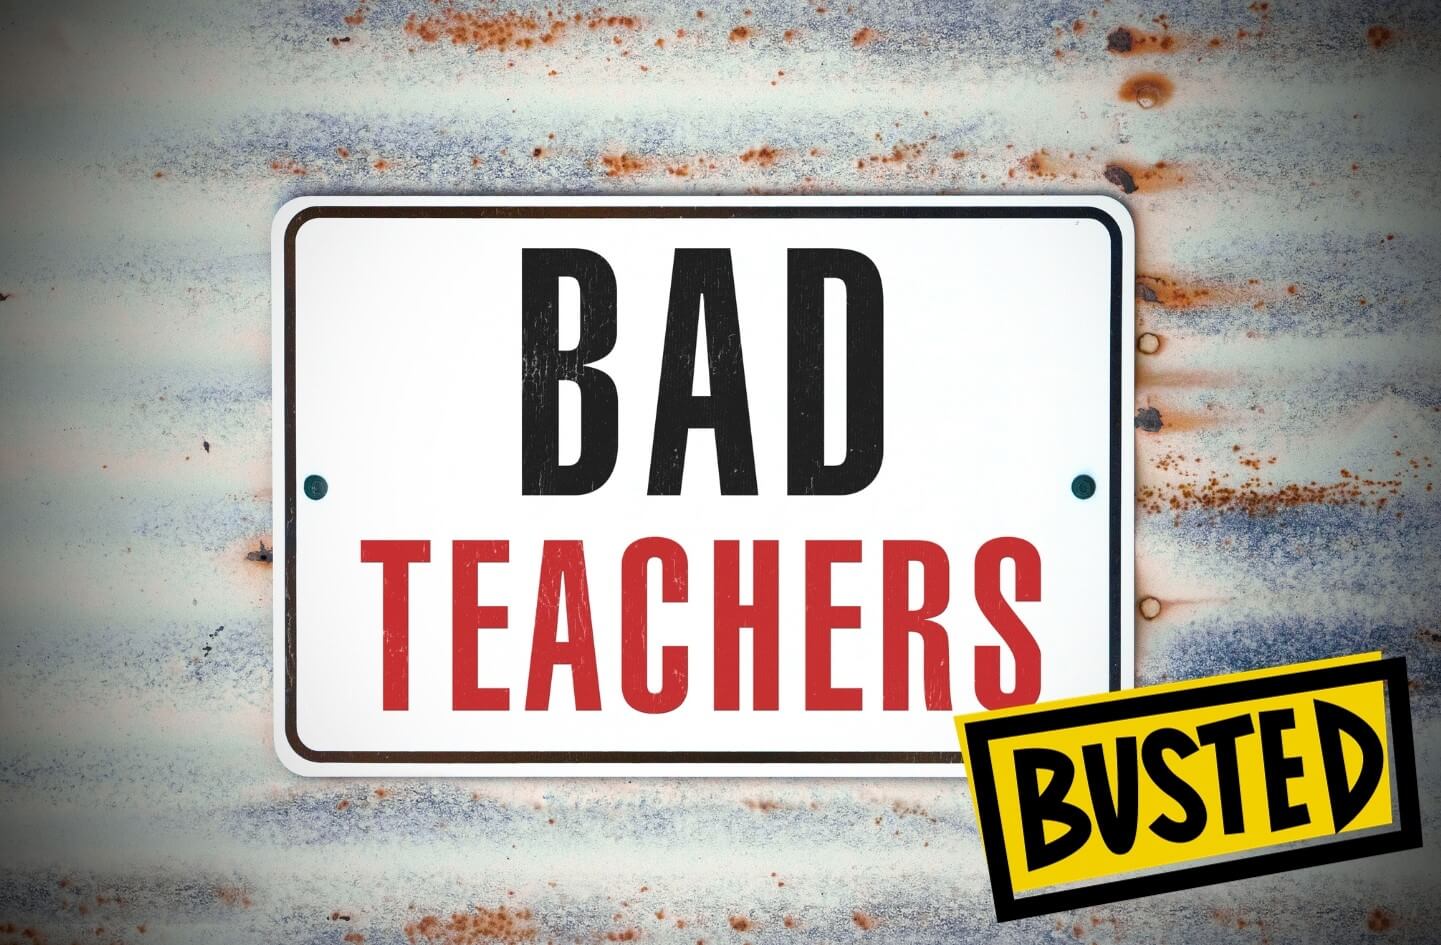 A sign that says 'Bad Teachers' but with an add-on sign below that says 'Busted'.